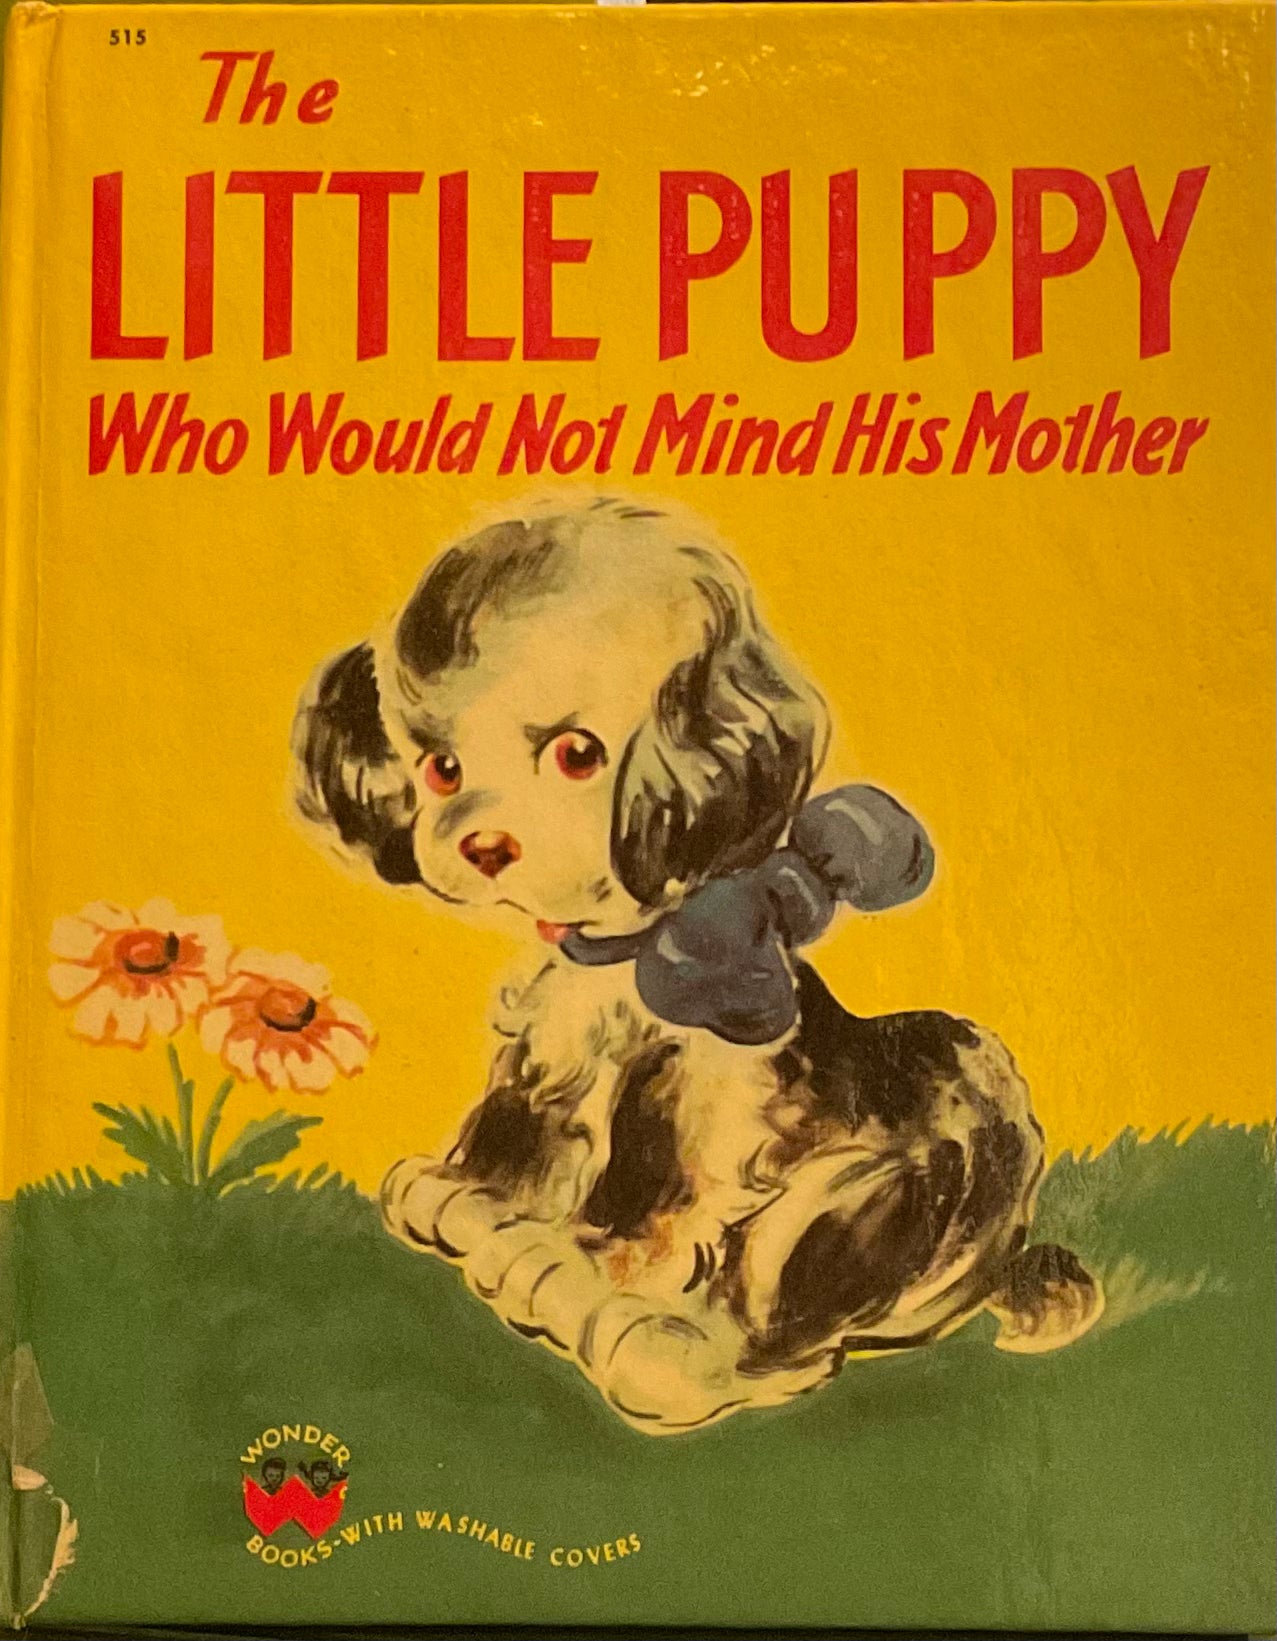 The Little Puppy Who Would Not Mind His Mother & Other Stories, Wonder Books